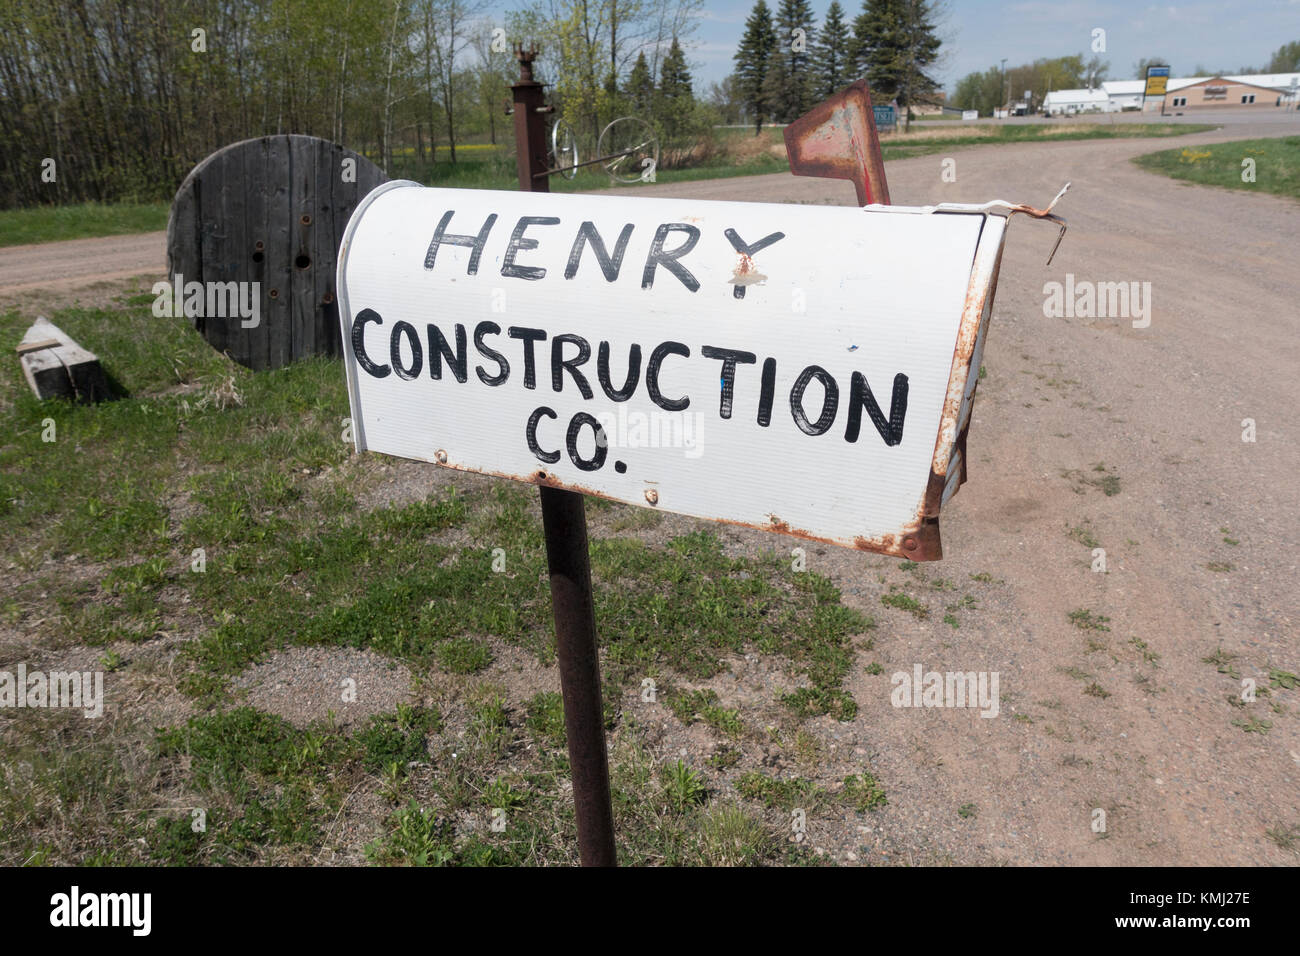 Henry Construction Co. rural mailbox inside the sculpture garden containing roadside attractions. Foley Minnesota MN USA Stock Photo